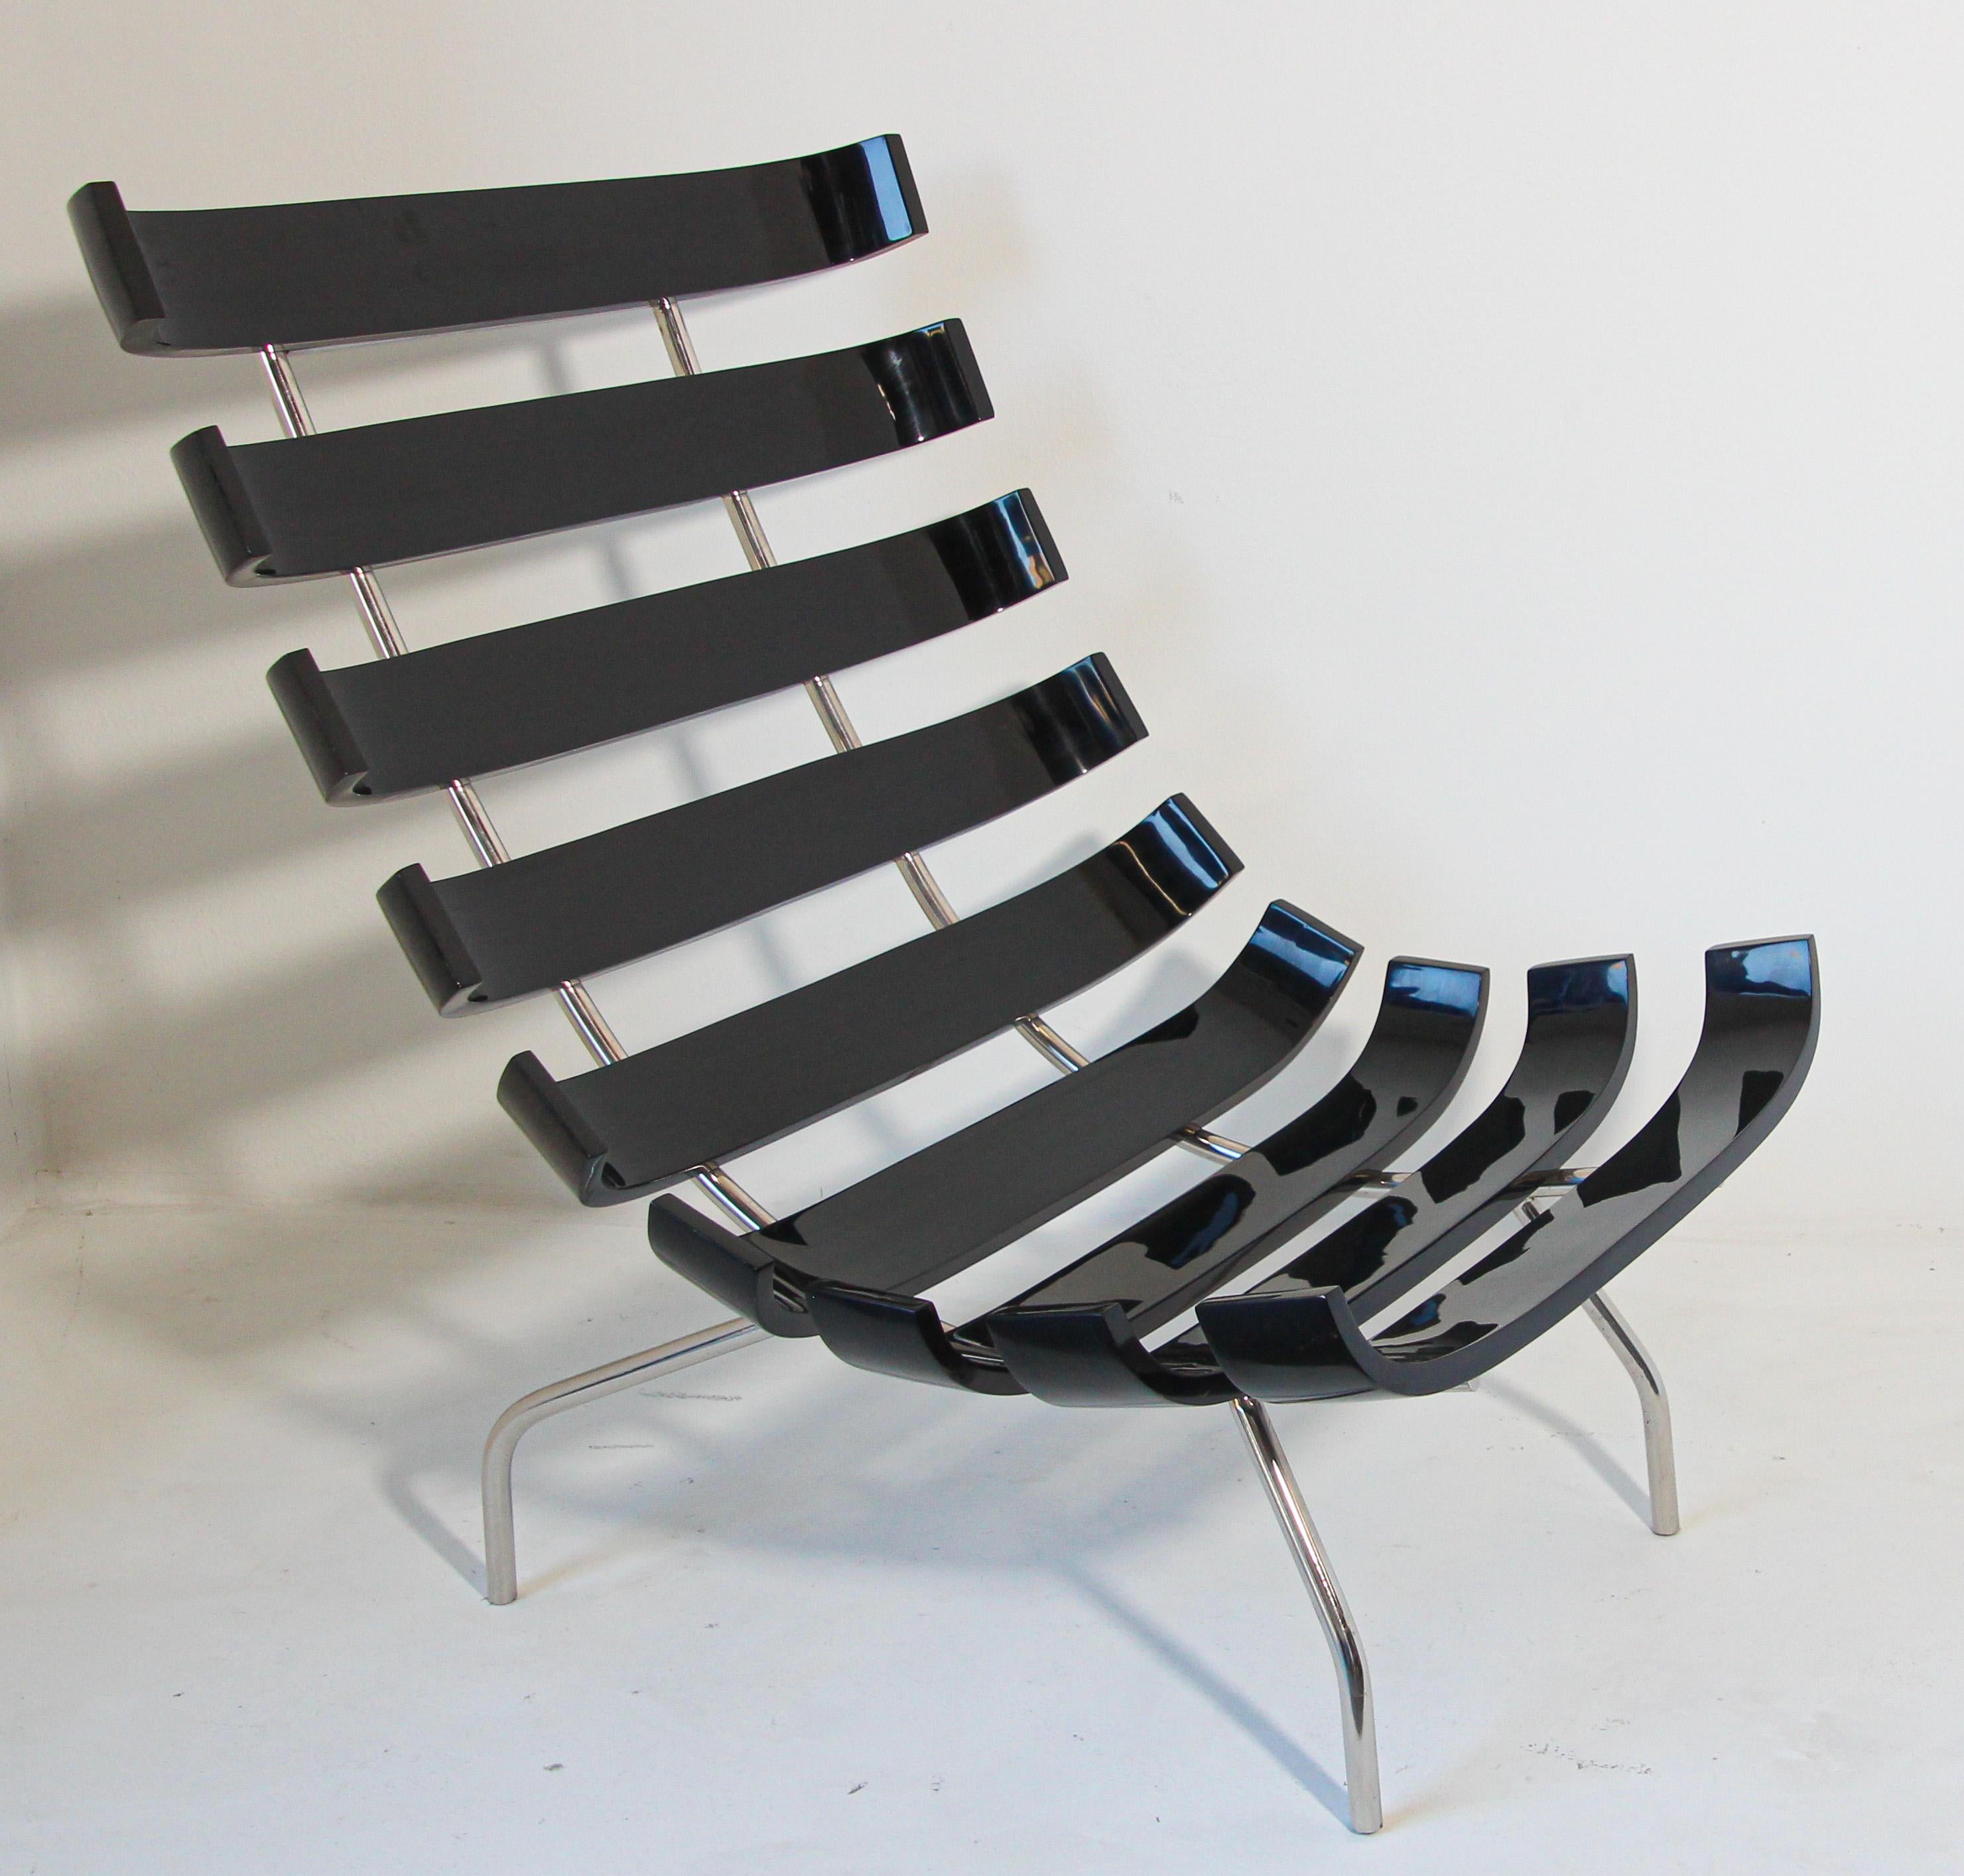 Martin Eisler Carlo Hauner Costela style lounge chair in black lacquer.
Originally designed by Martin Eisler in 1952 this is an icon of Brazilian 1950s design.
Martin Eisler and Carlo Hauner Costela lounge chair, the Costela chair was an important